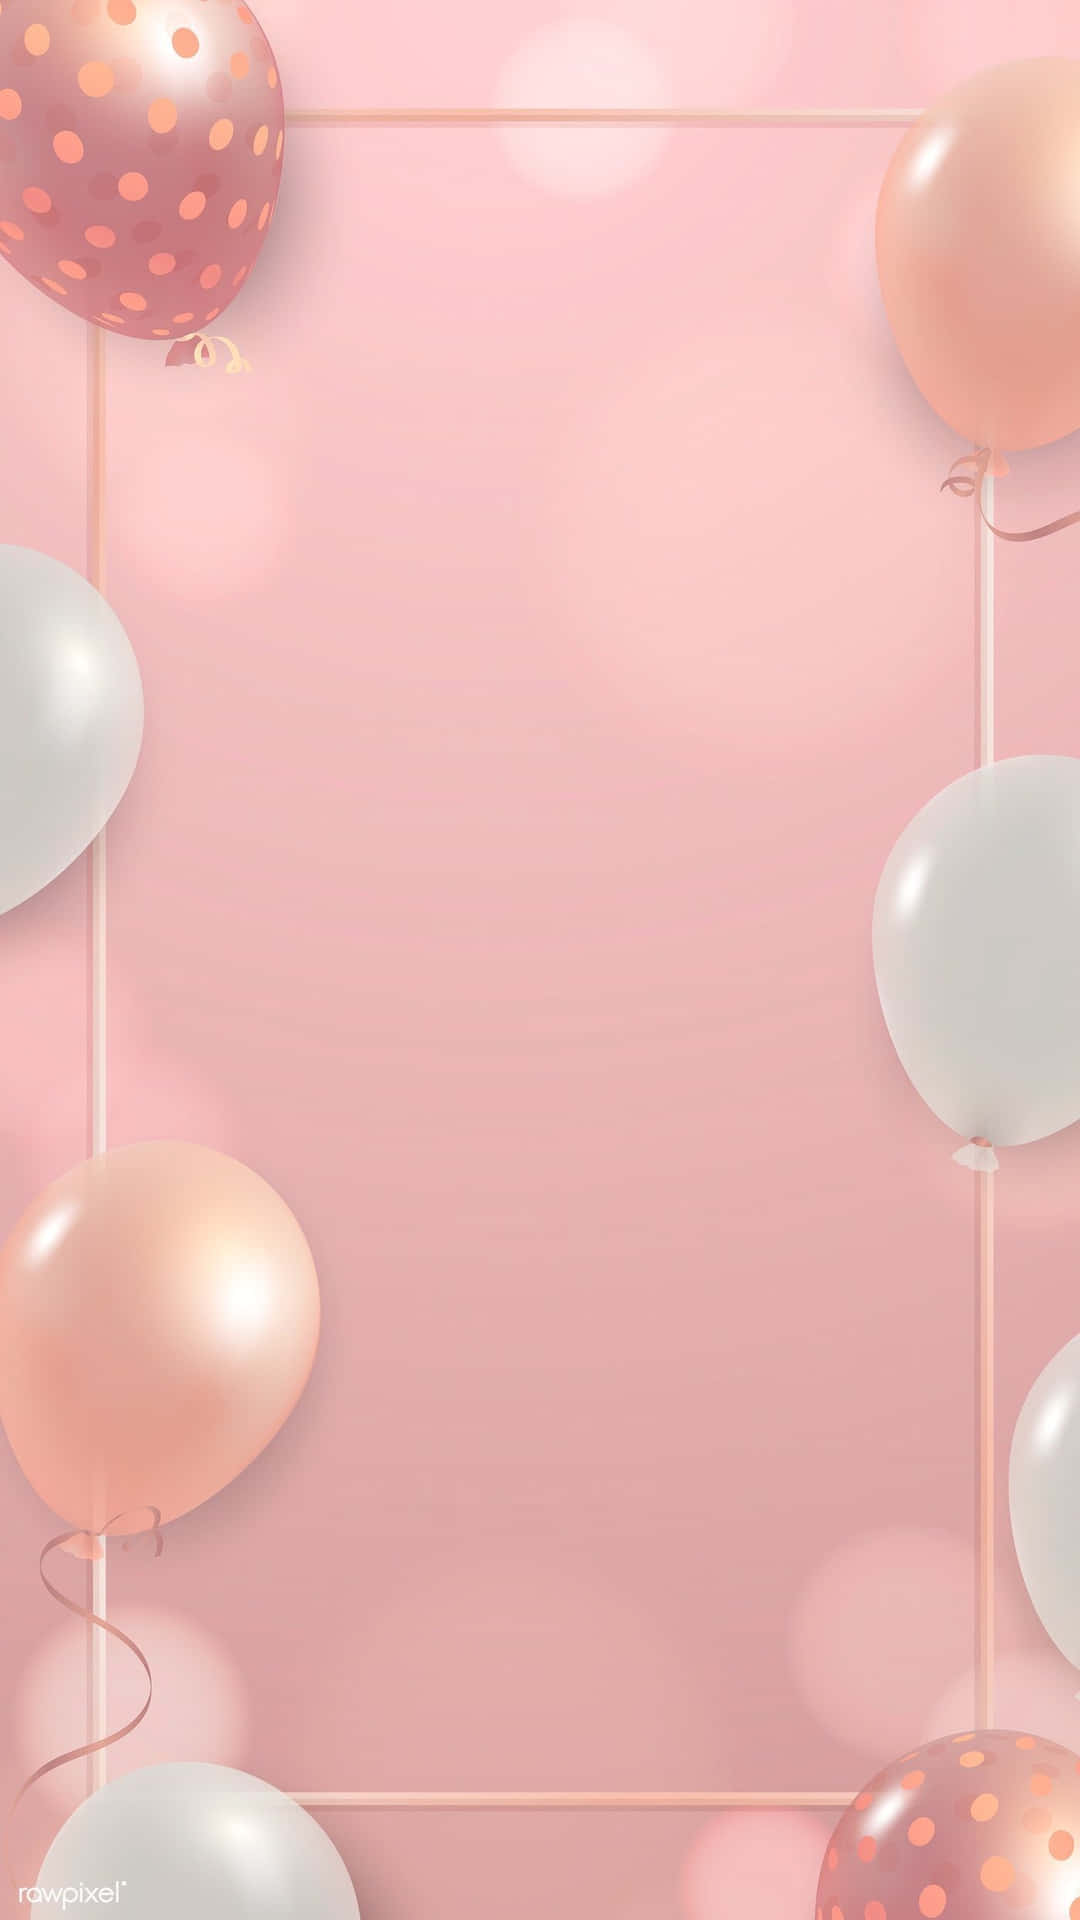 Birthday Balloons With Border Pink Aesthetic Picture